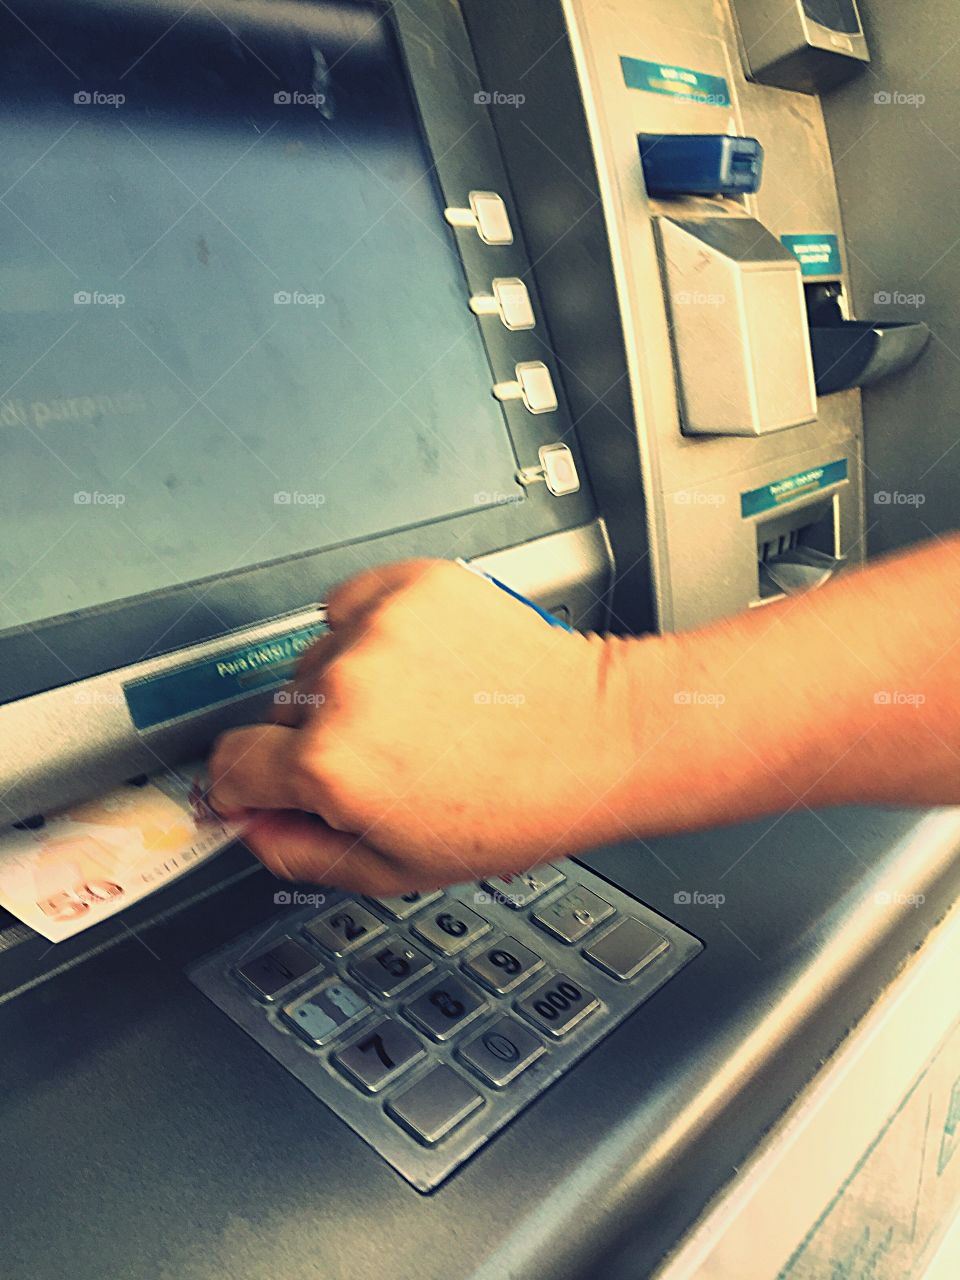 Withdrawing money